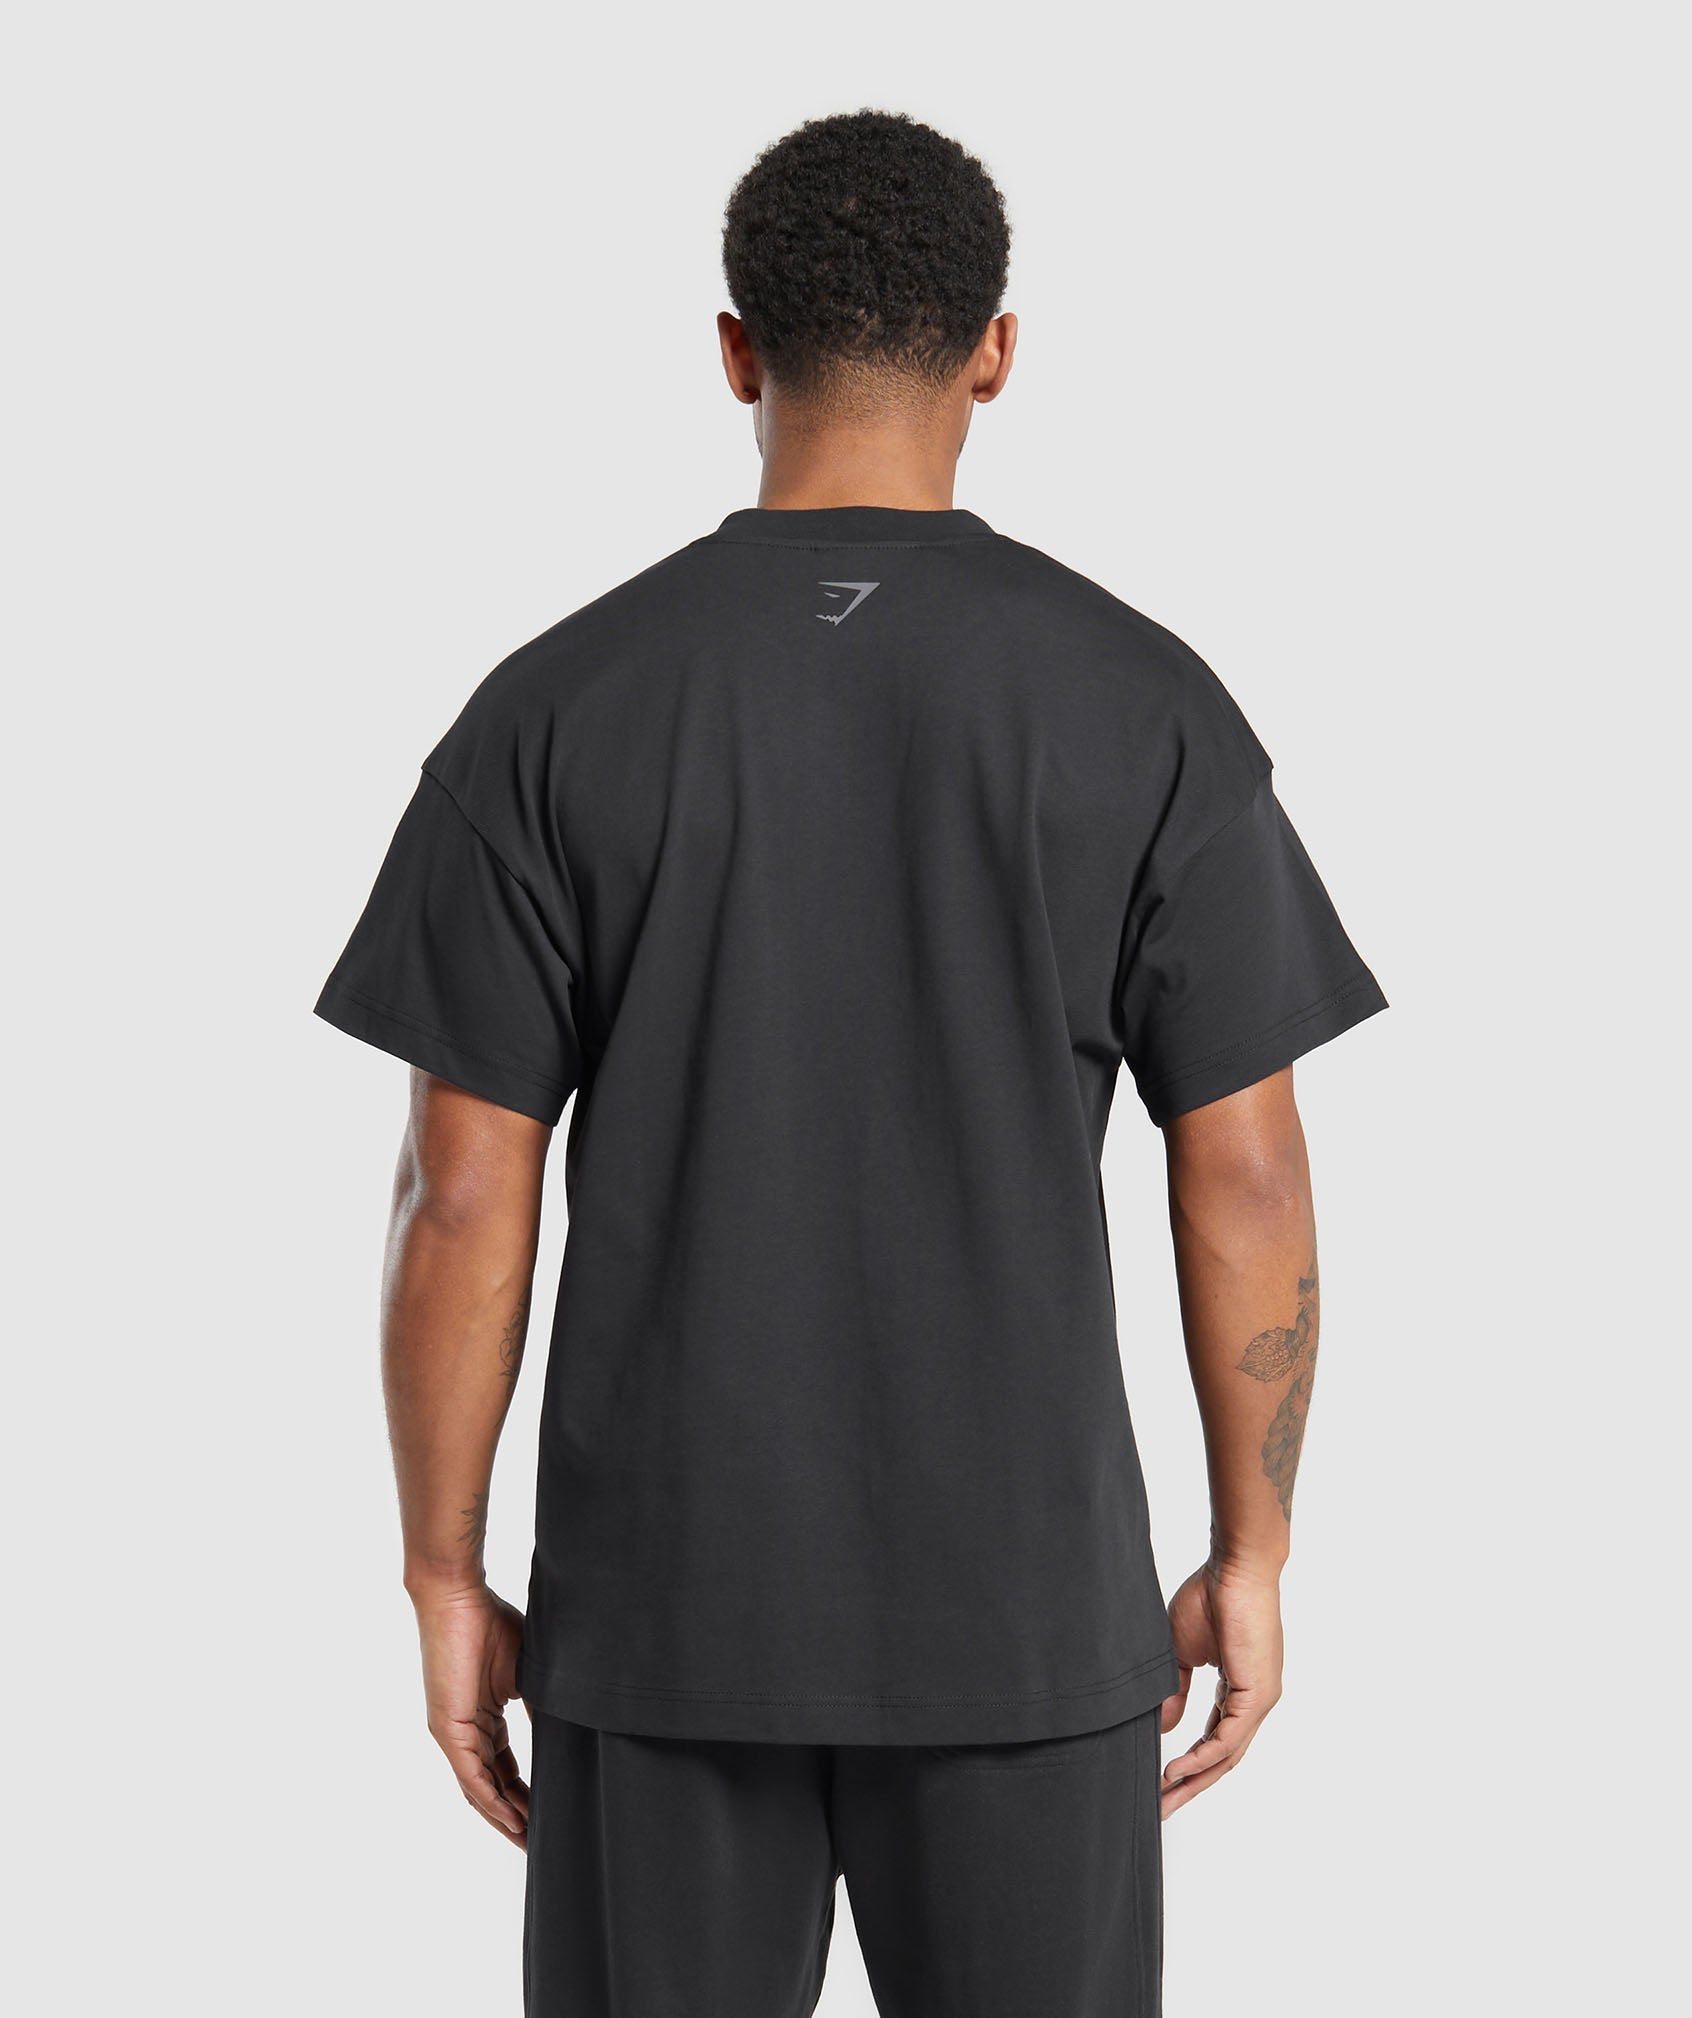 Built in the UK T-Shirt in Black - view 2